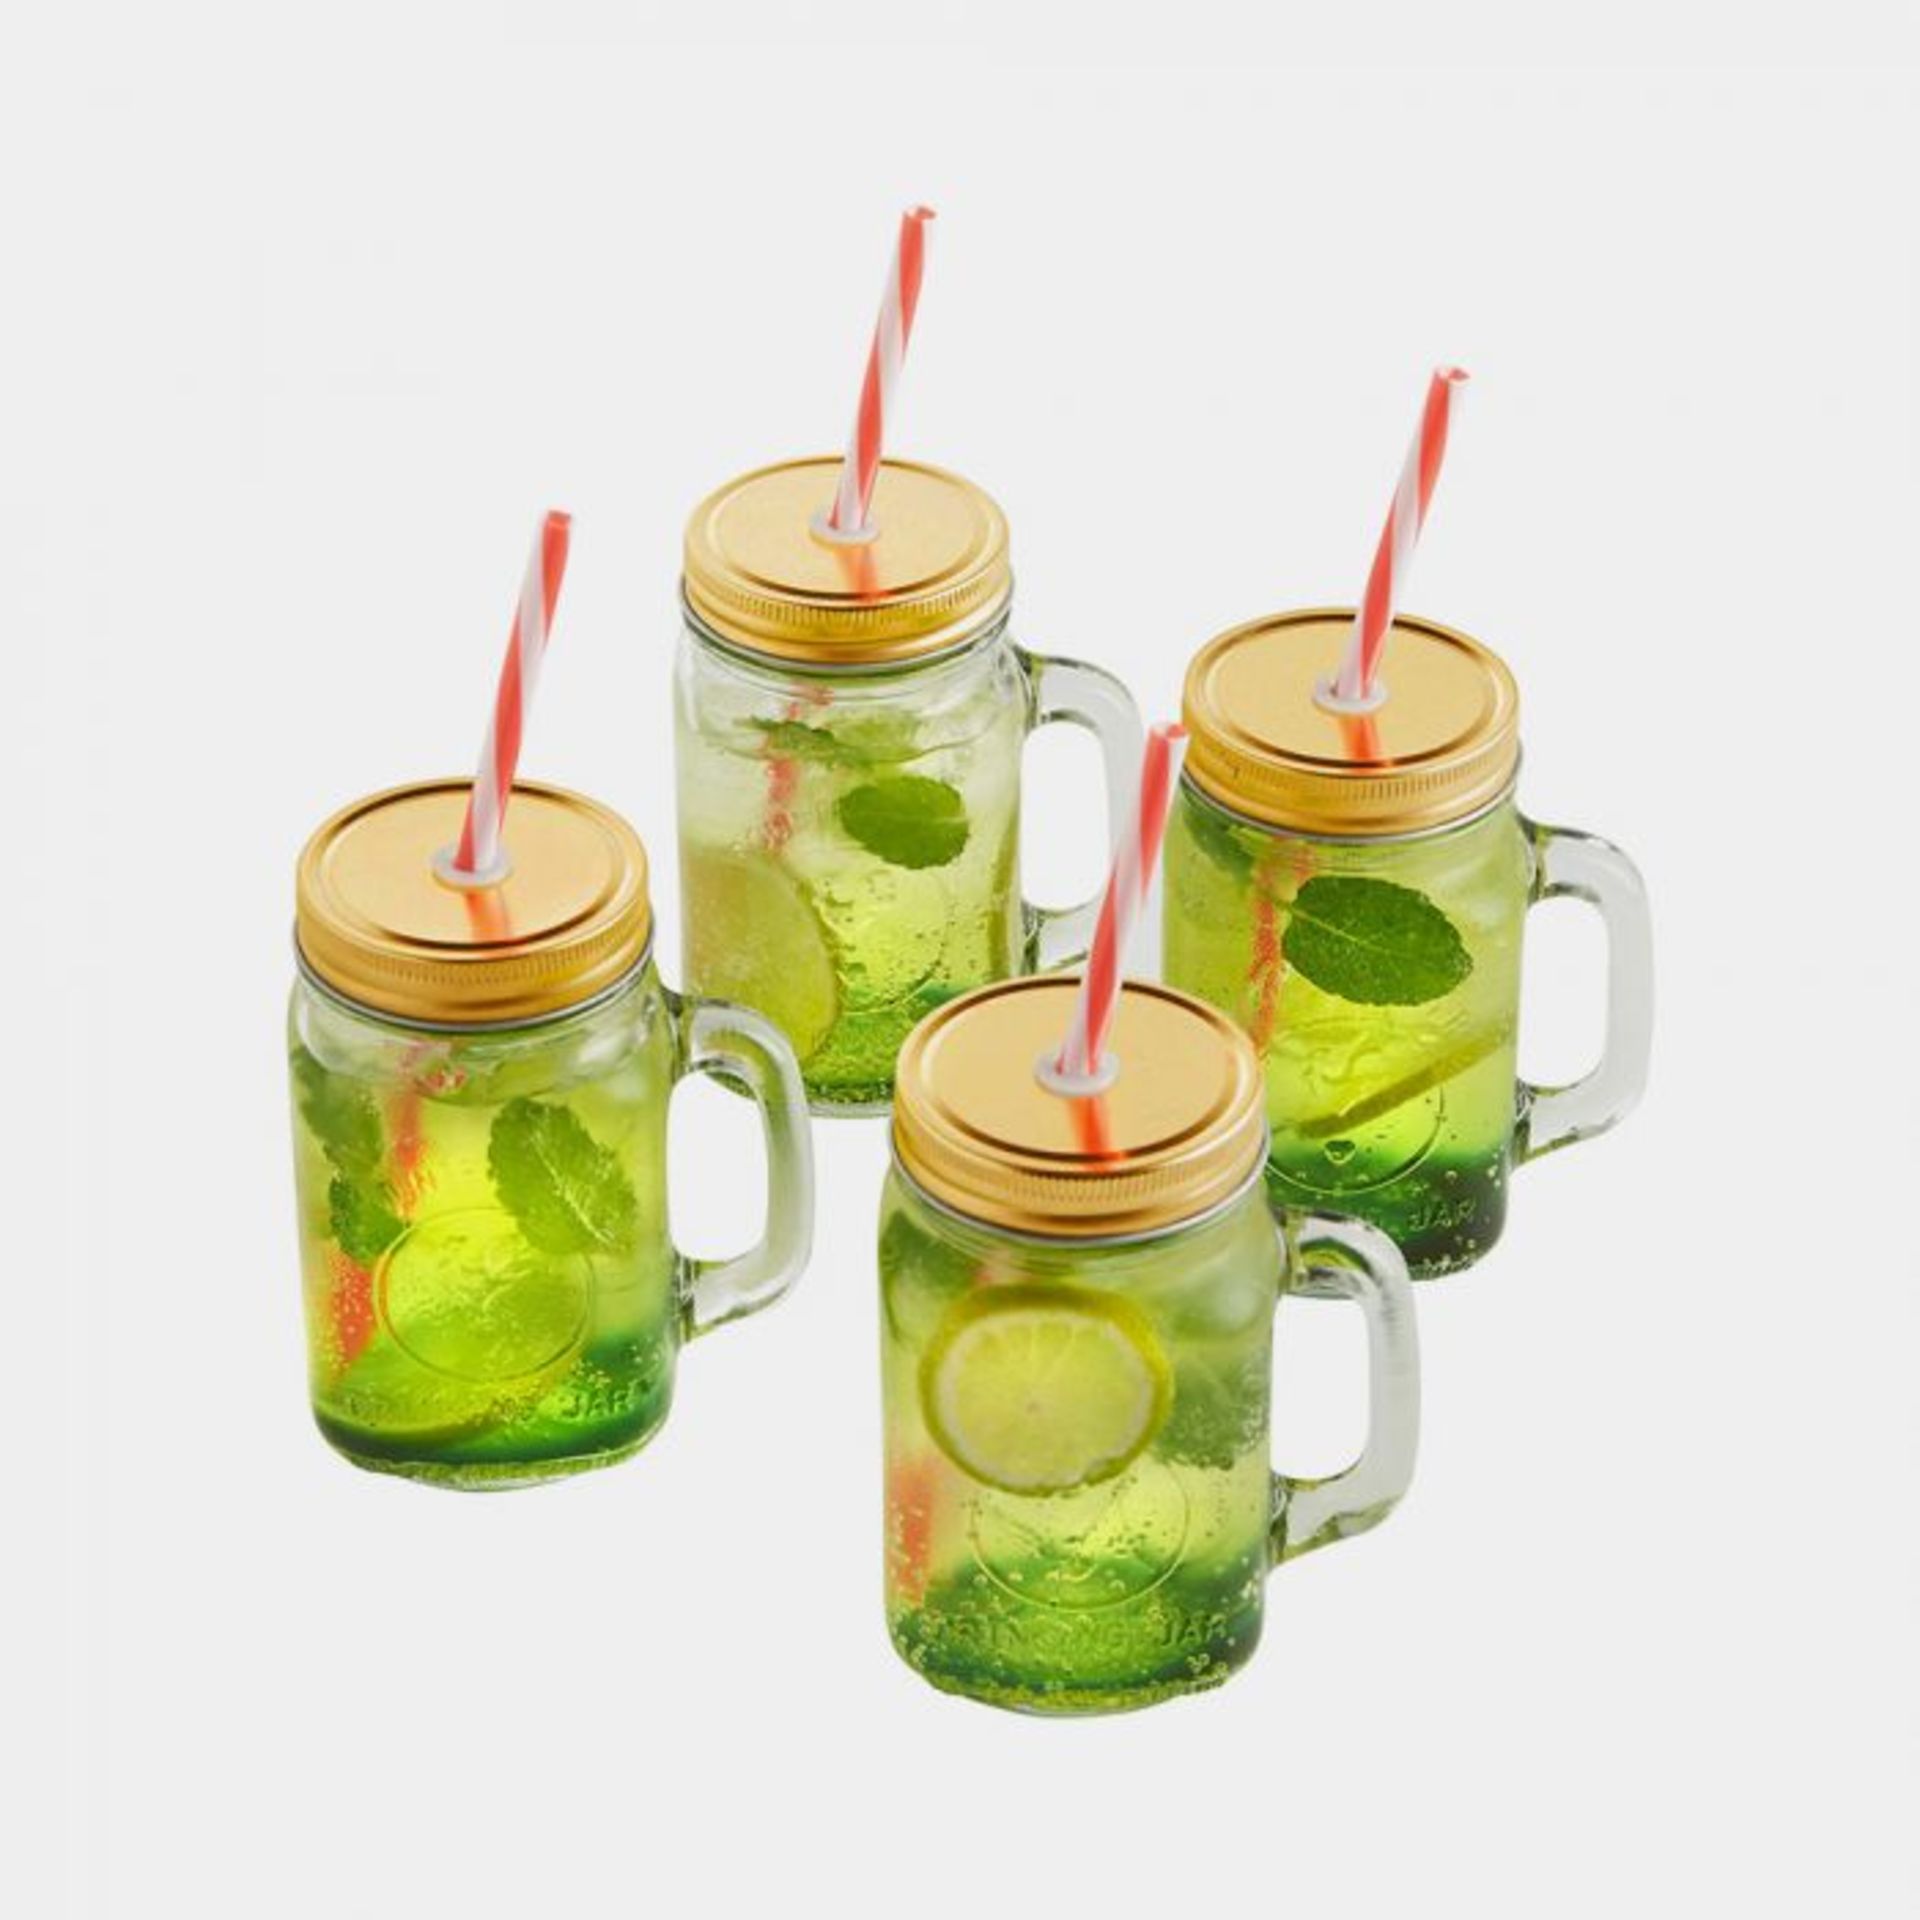 9 X BRAND NEW 4 PIECE GOLD MASON JAR SETS, Tired of sipping from the same old glasses? Then try